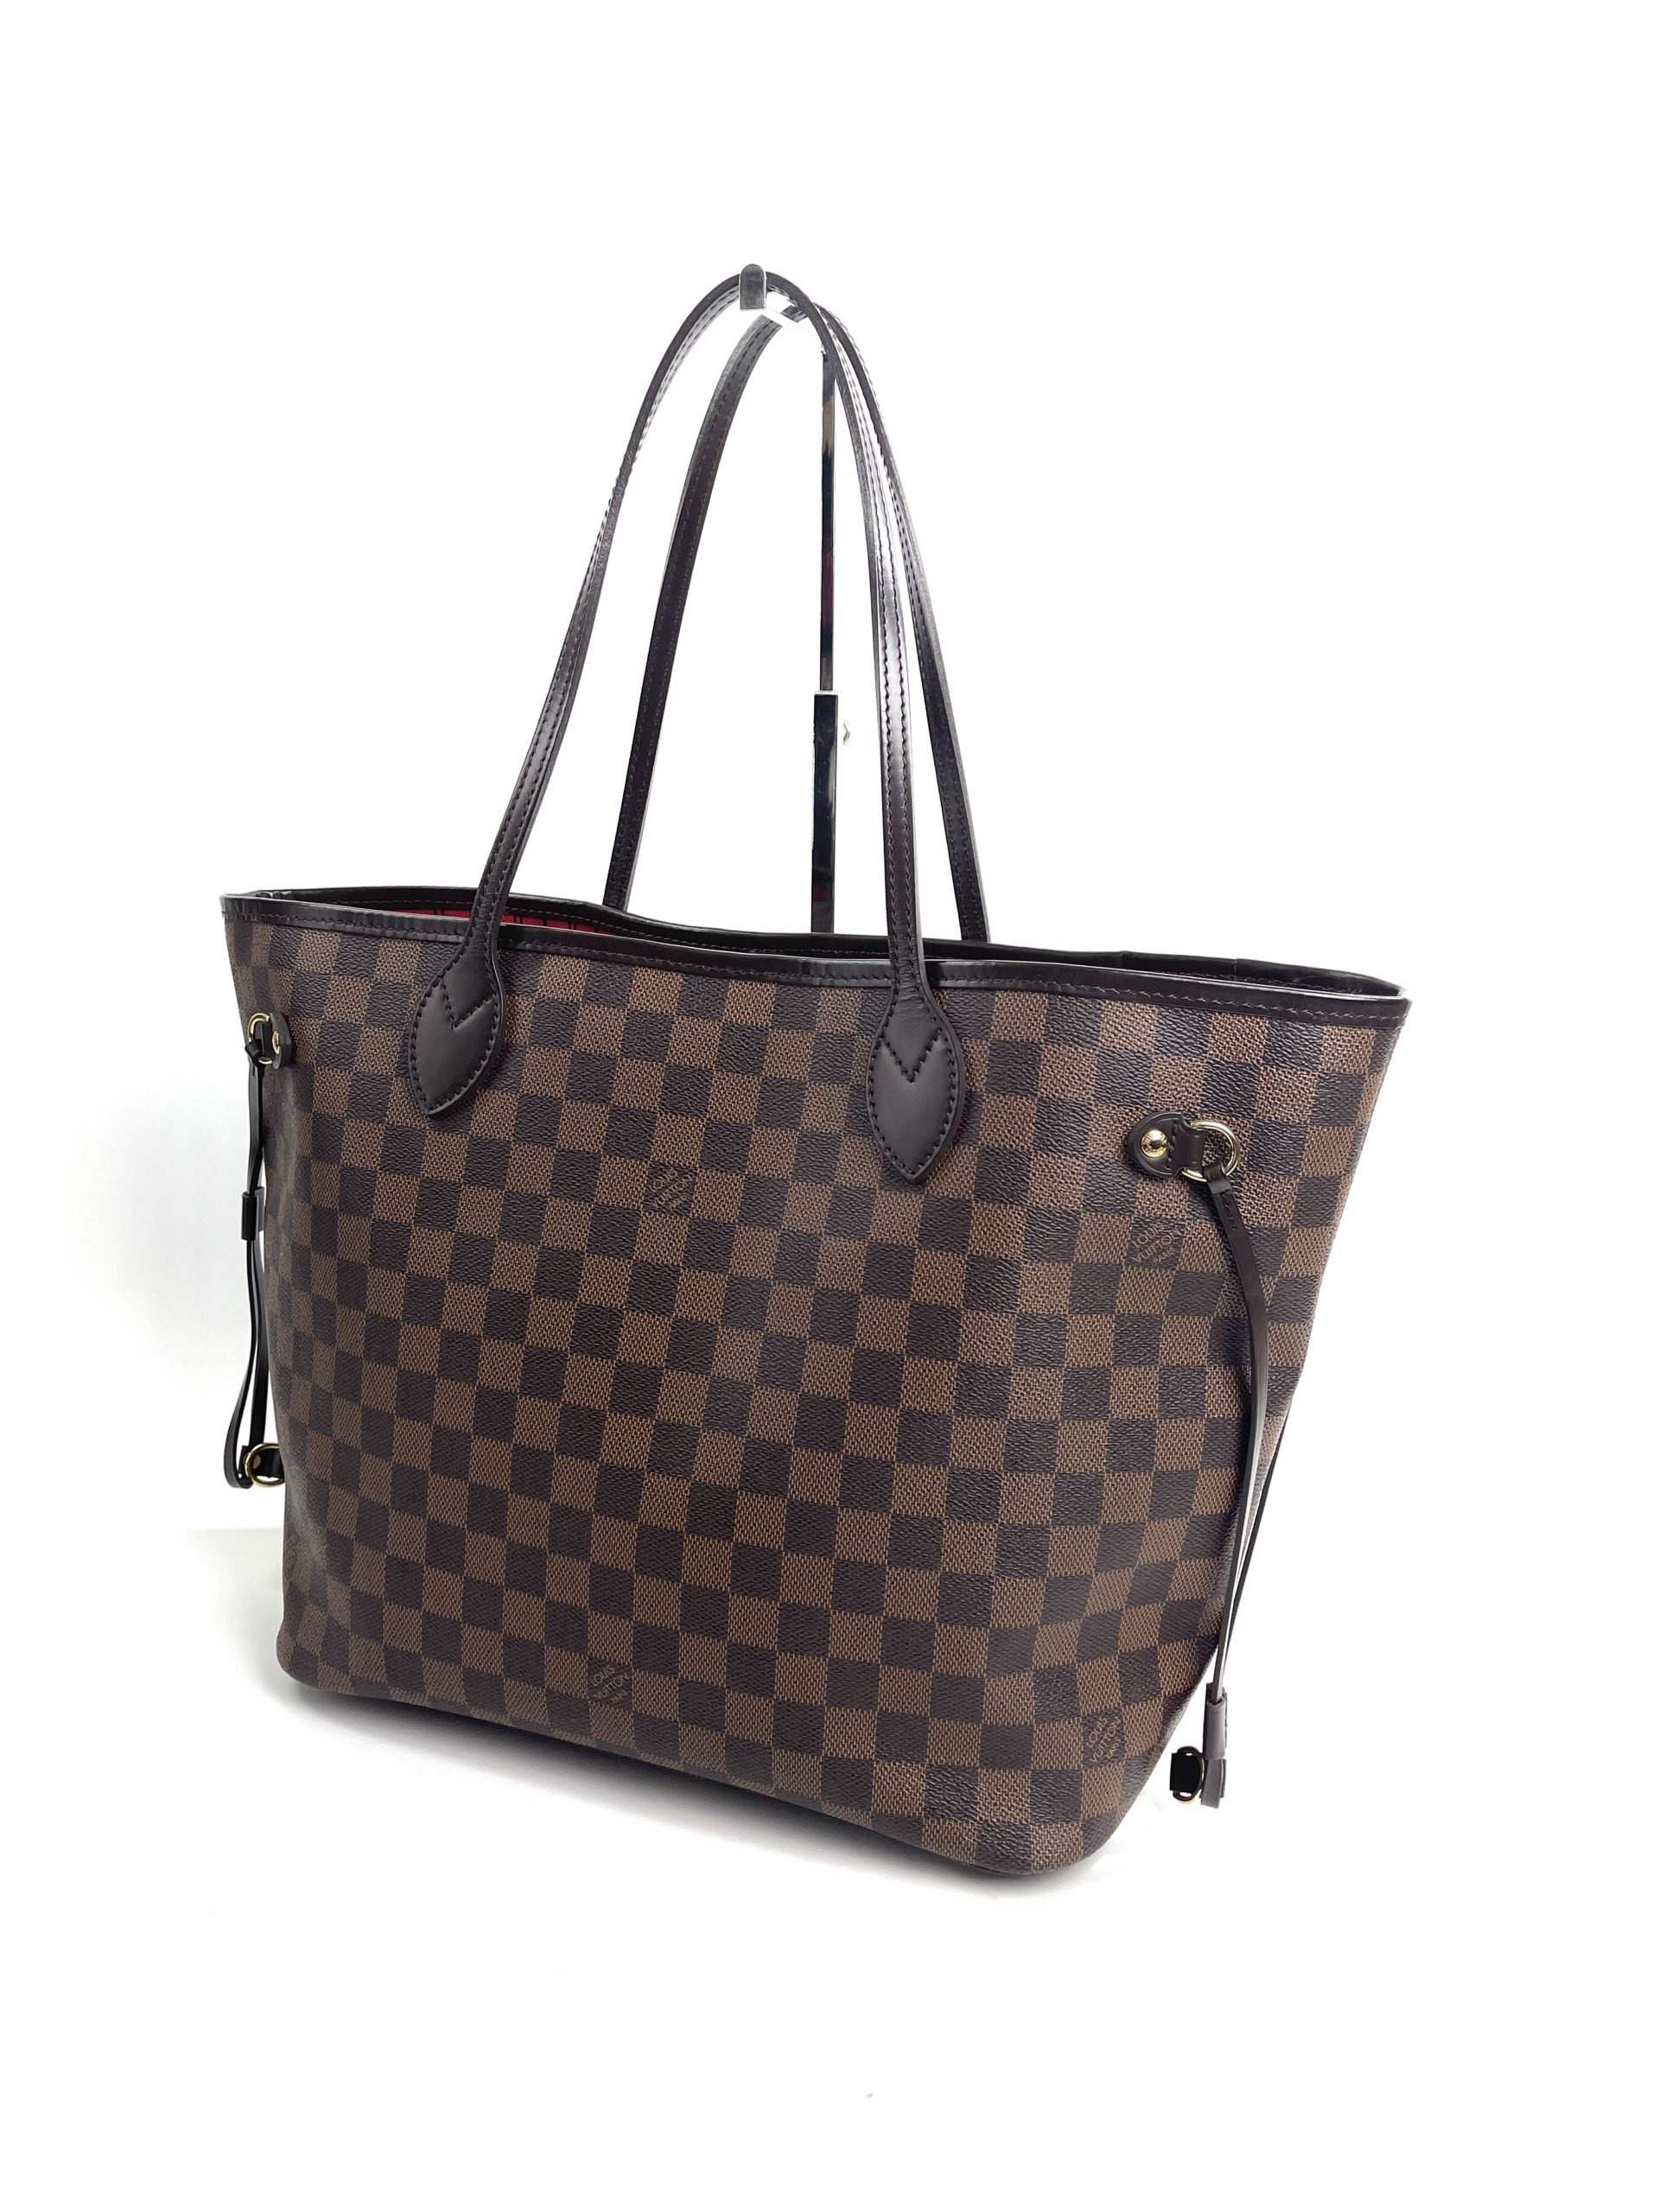 do real louis vuitton purses have red inside